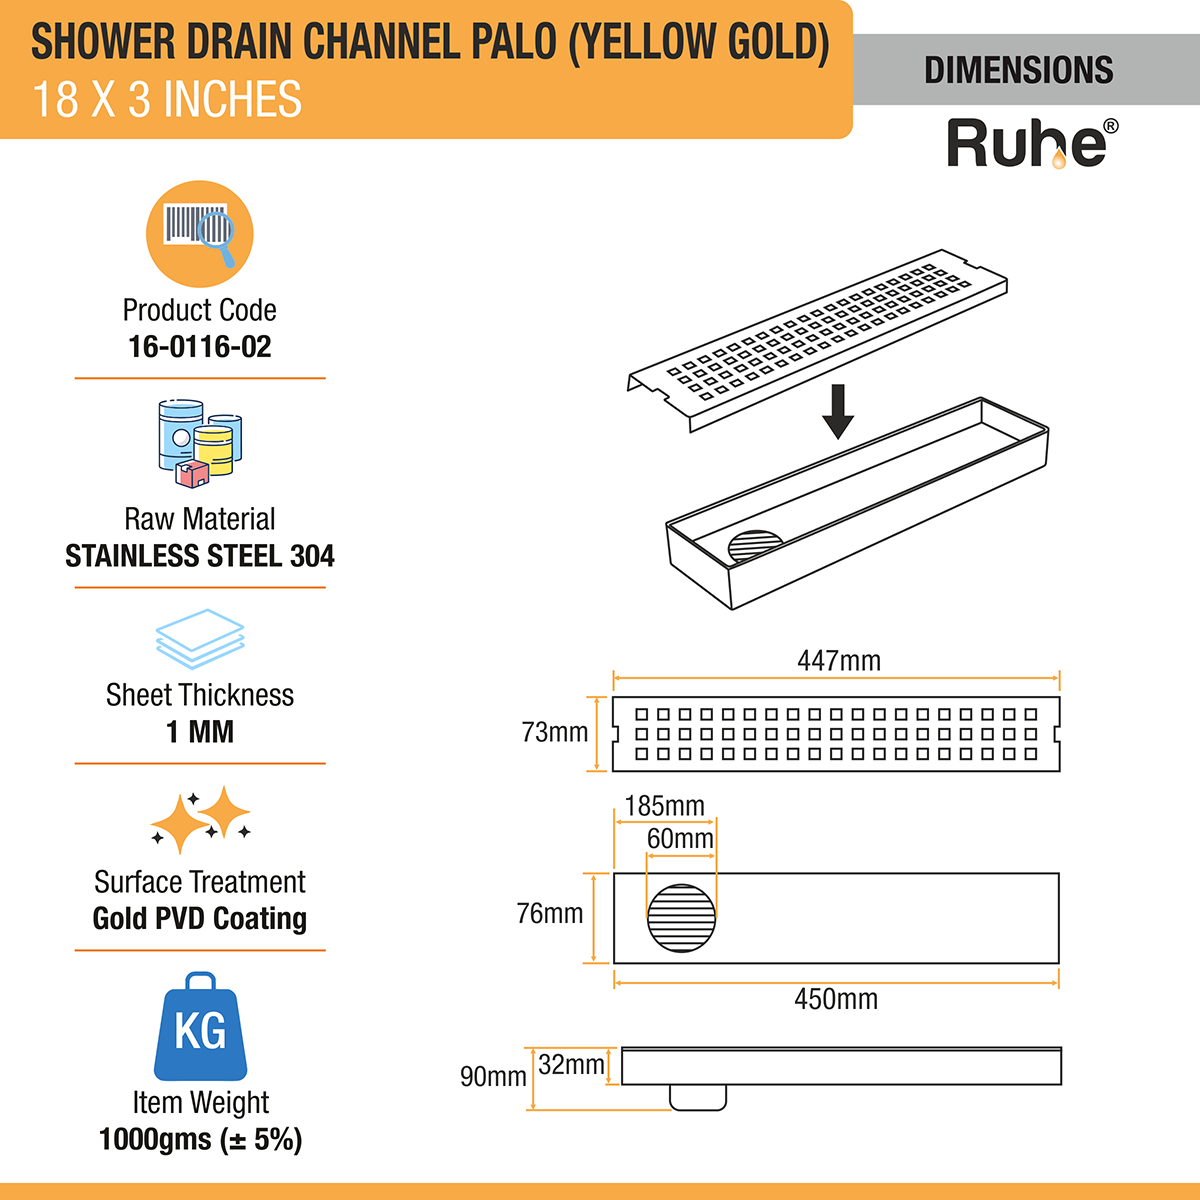 Palo Shower Drain Channel (18 x 3 Inches) YELLOW GOLD dimensions and size